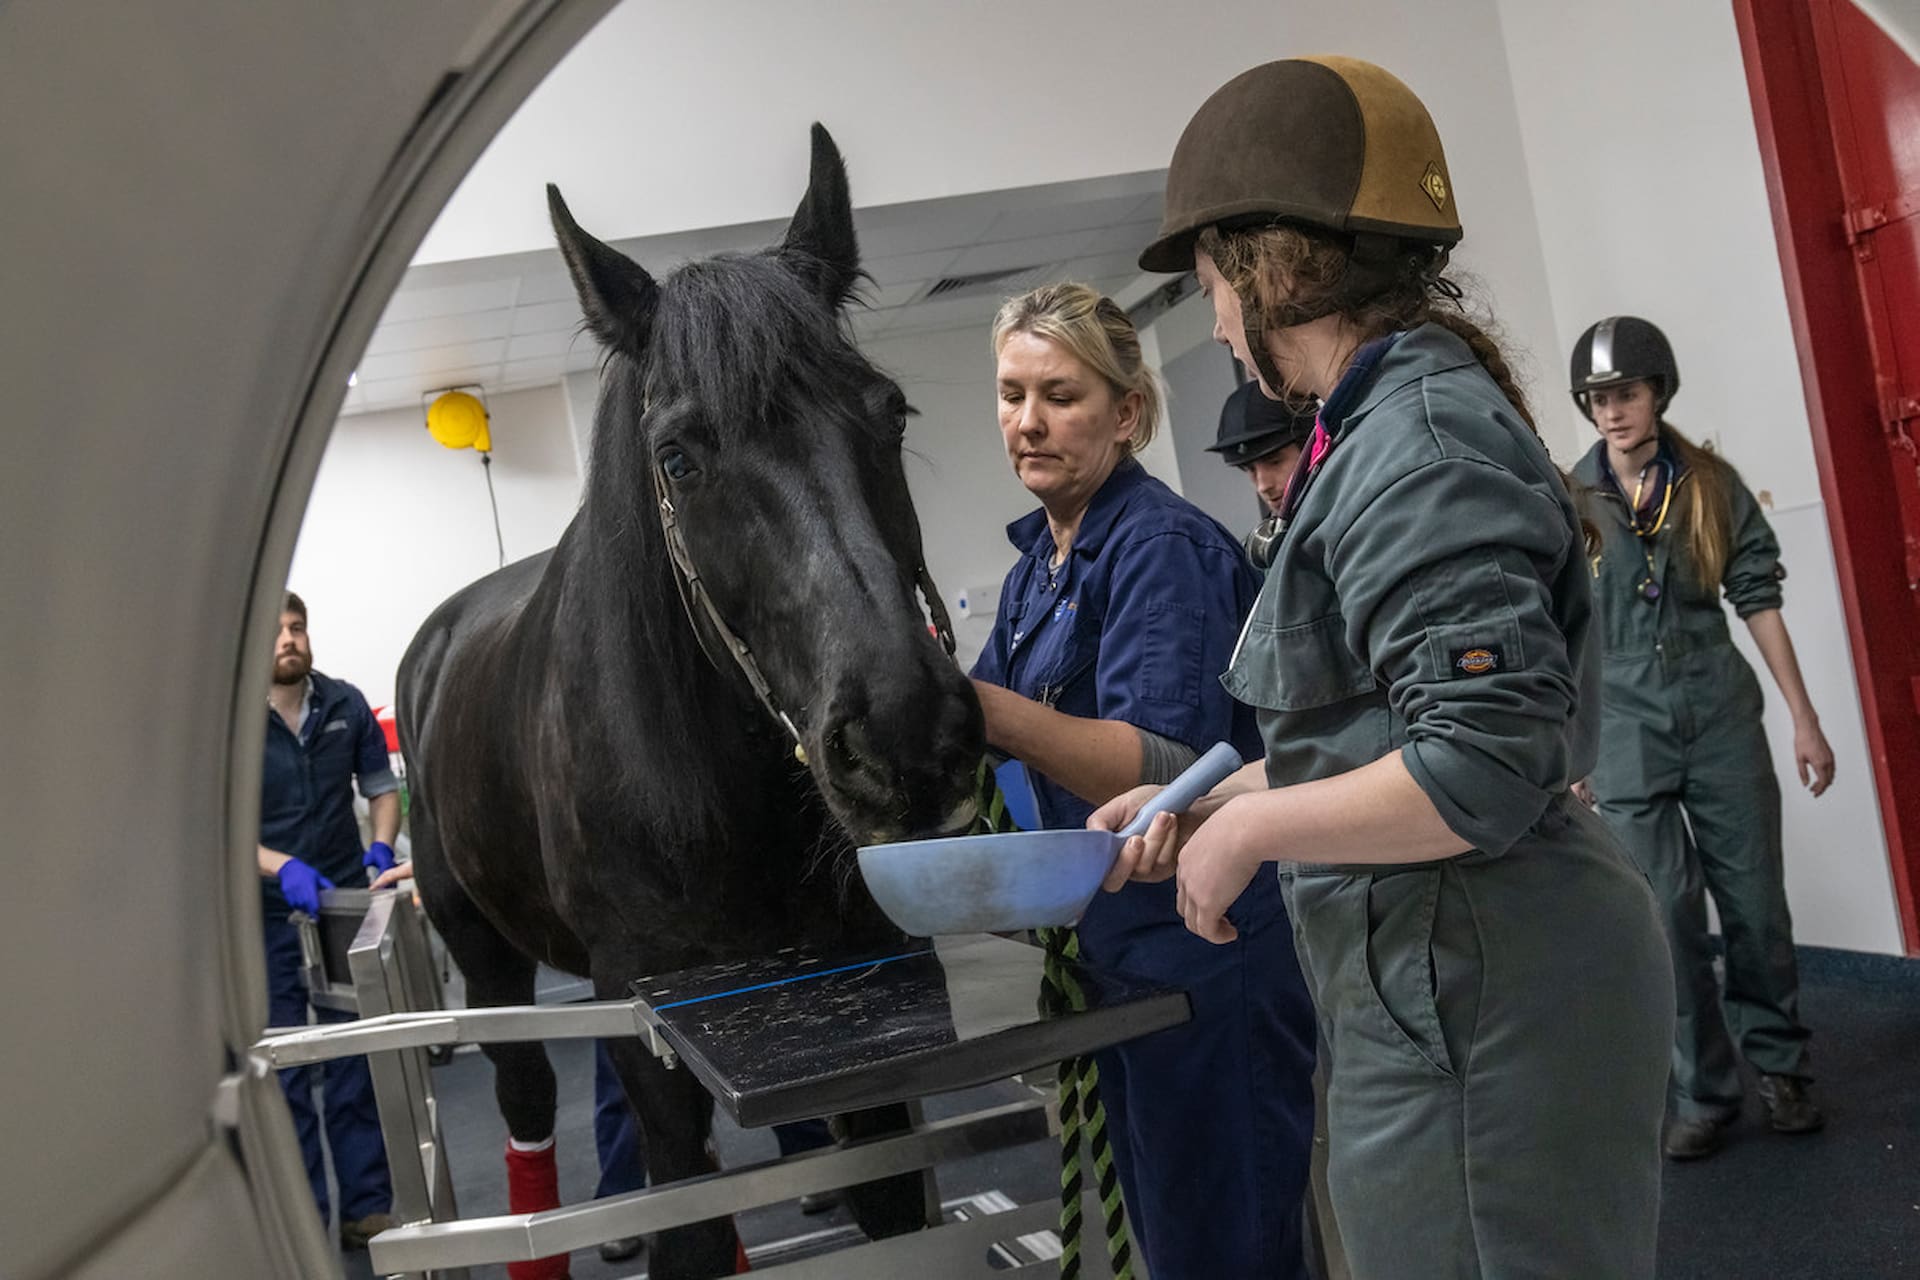 Two veterinary sciences students with a horse